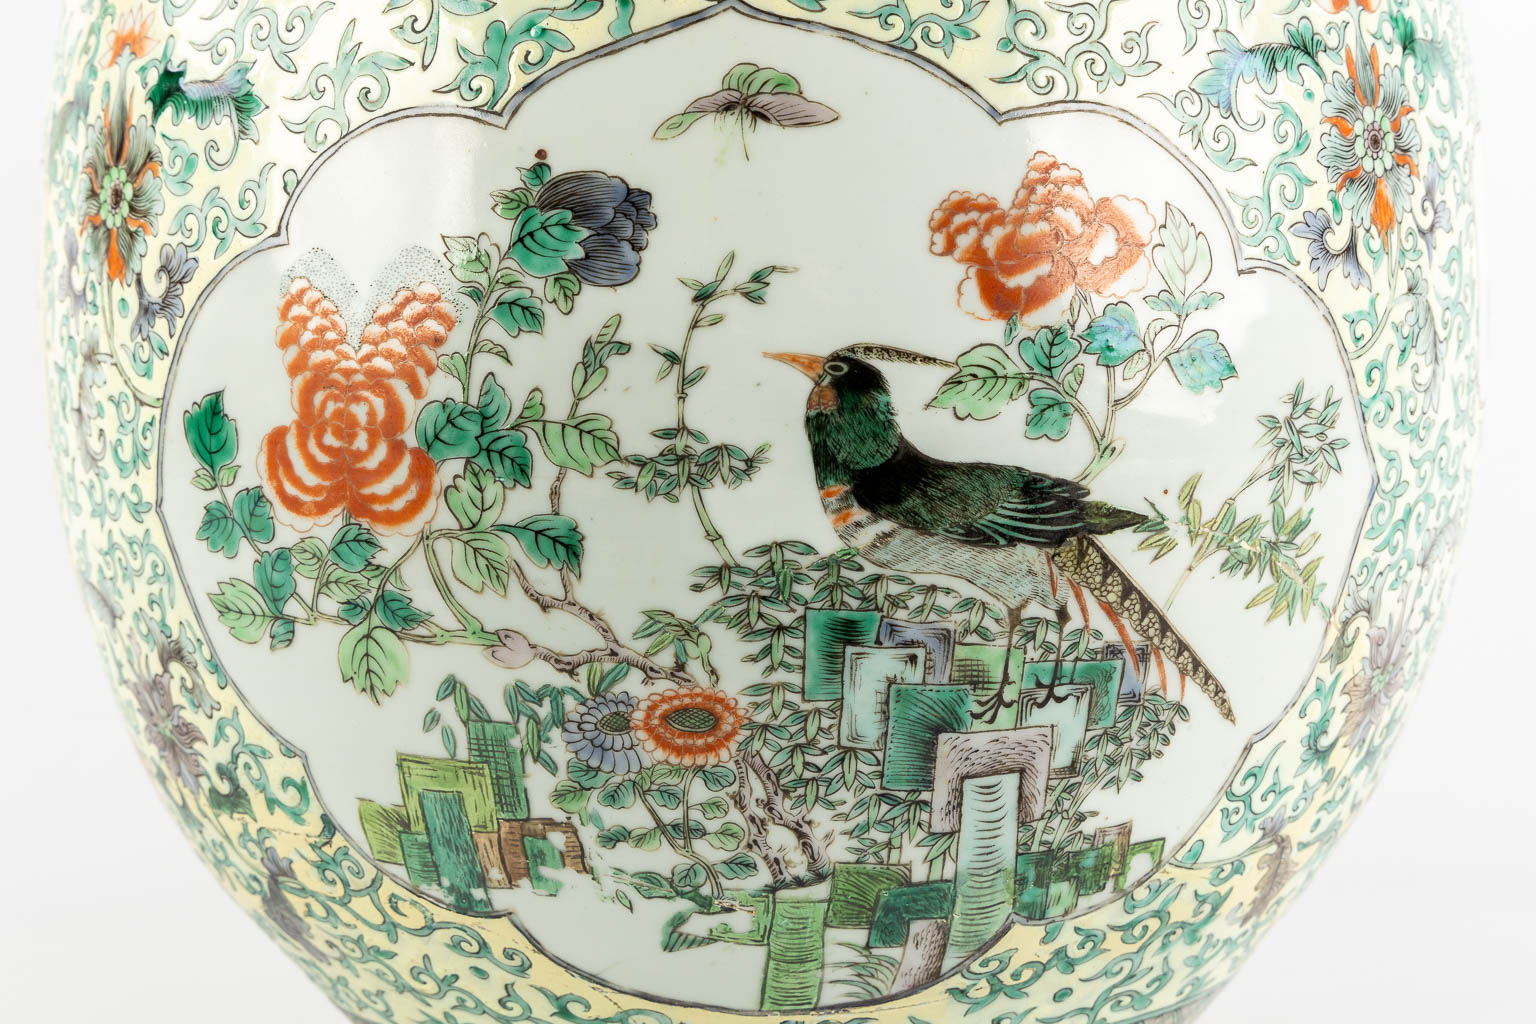 A Large Chinese Cache-Pot, Famille Verte decorated with fauna and flora. 19th C. (H:35 x D:40 cm)